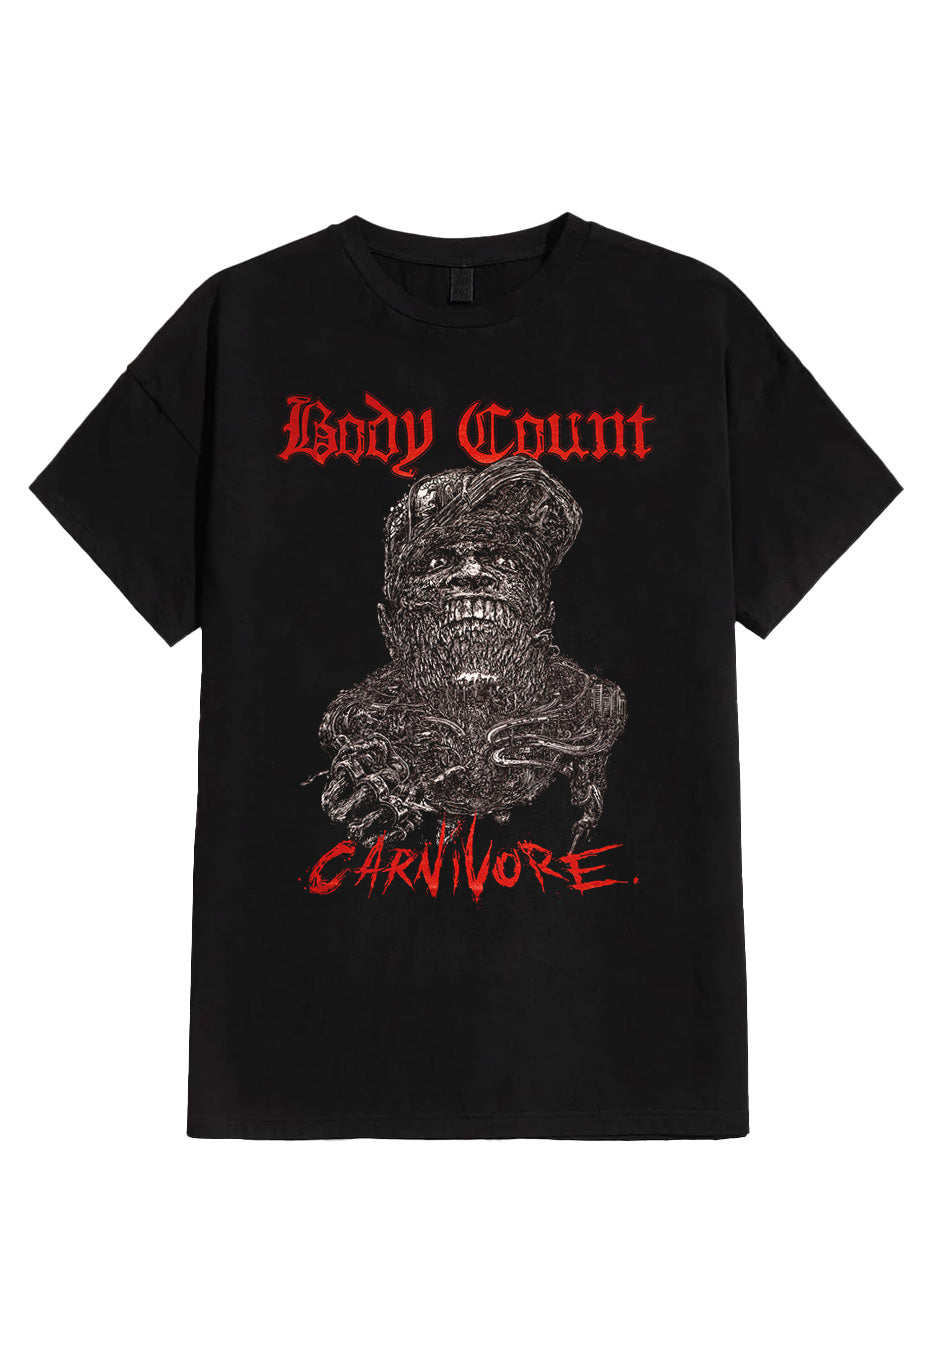 Body Count - Carnivore - T-Shirt | Neutral-Image